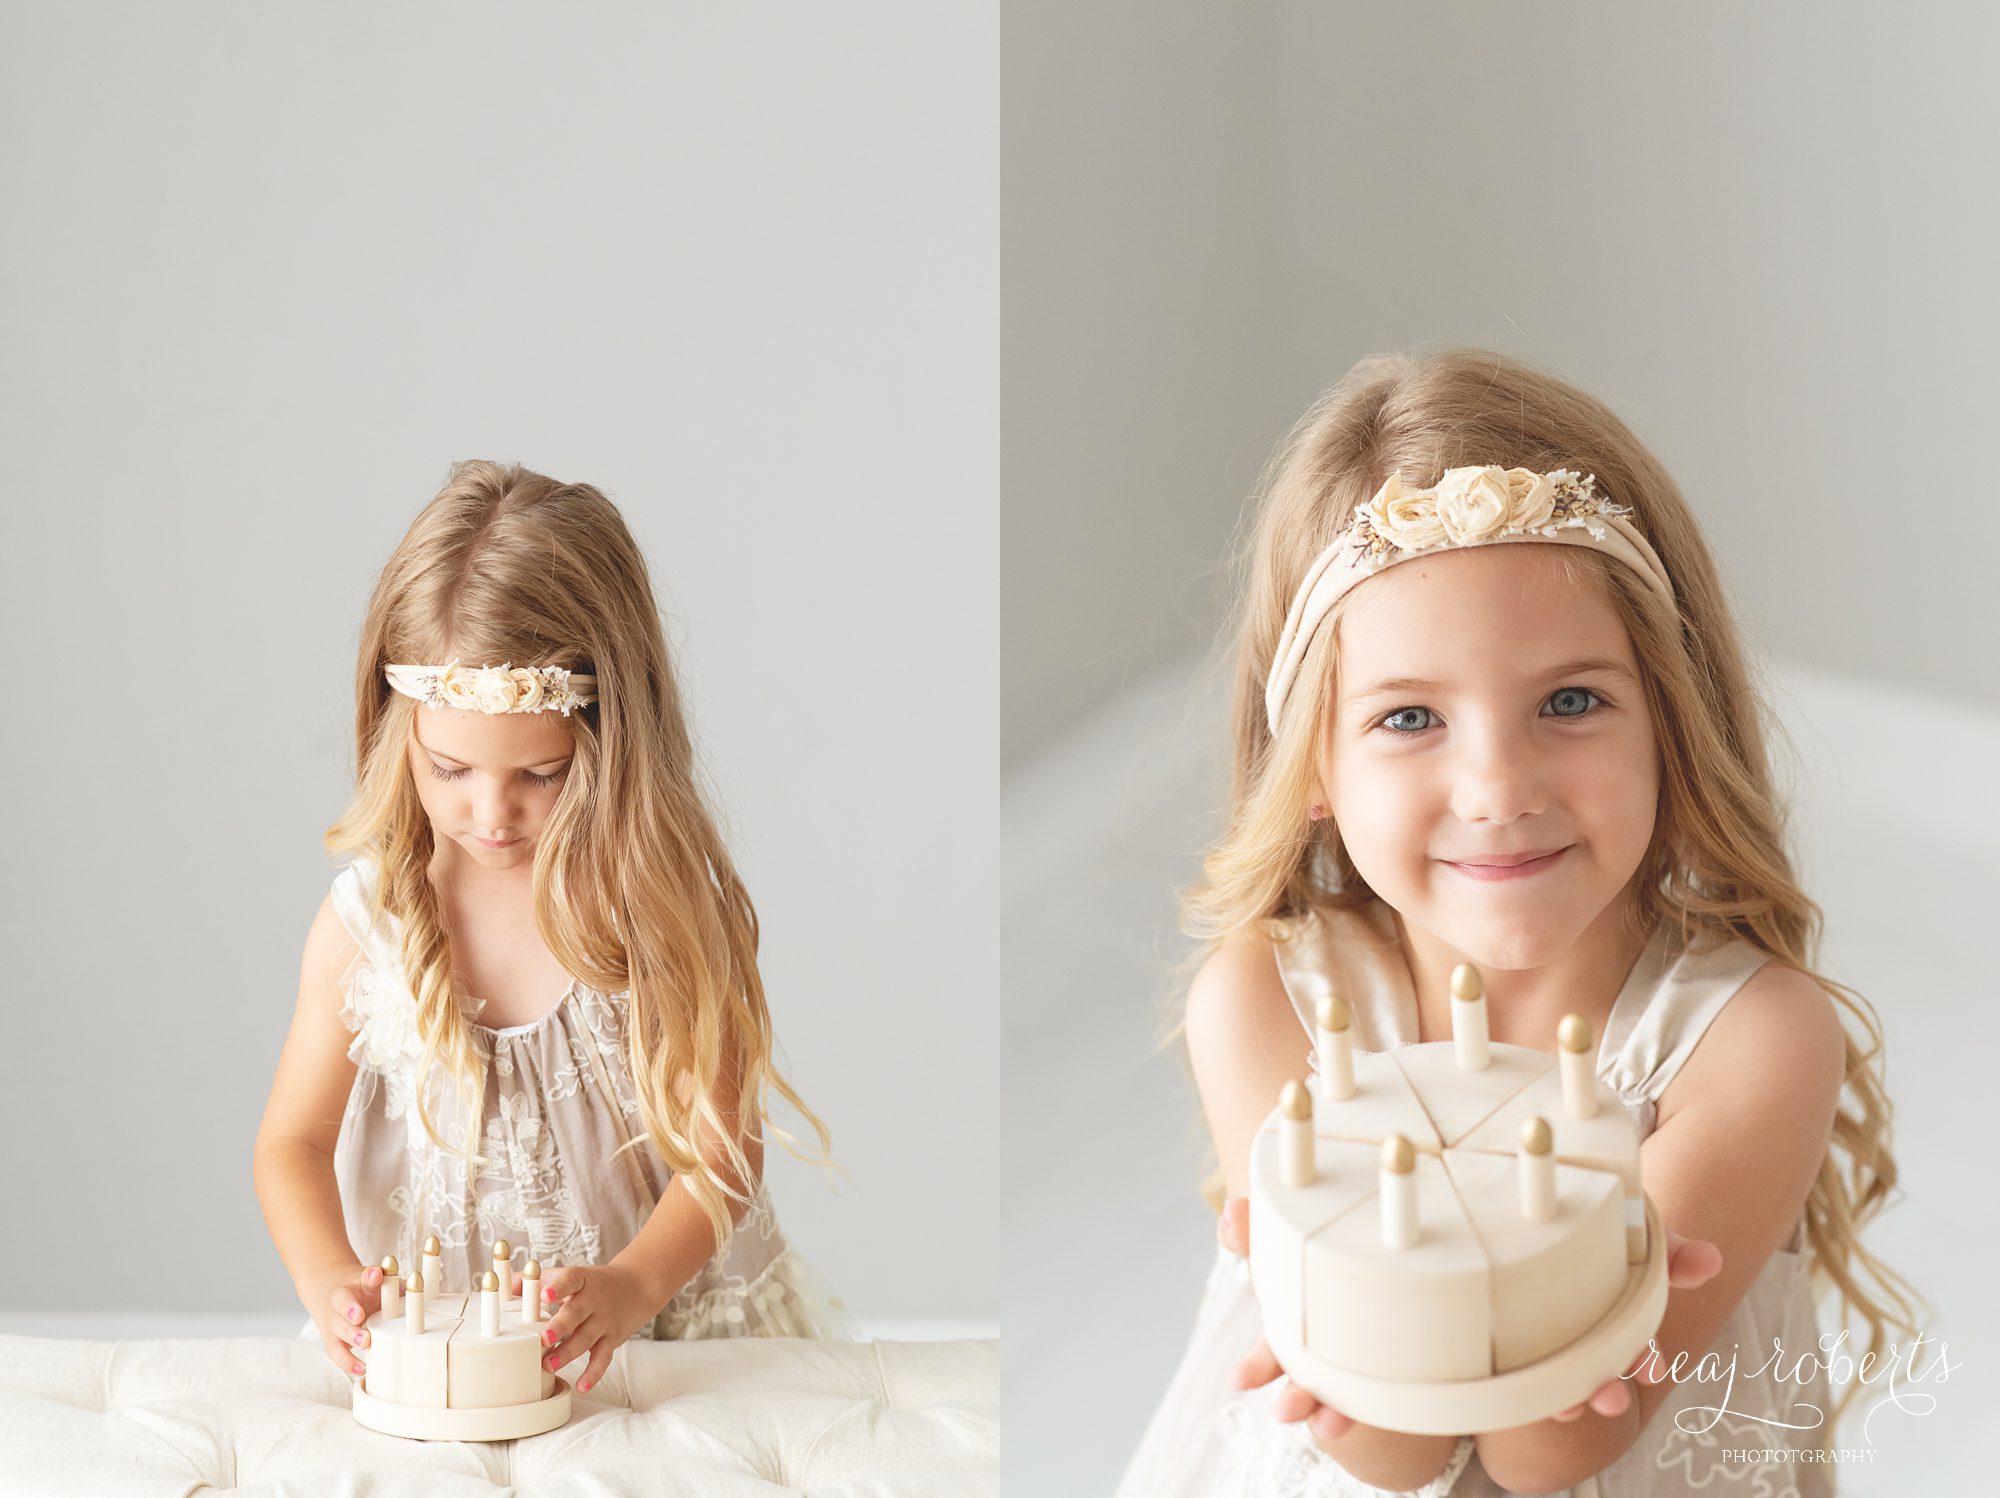 4 year old birthday photos Phoenix Family and Child Photographer | Reaj Roberts Photography